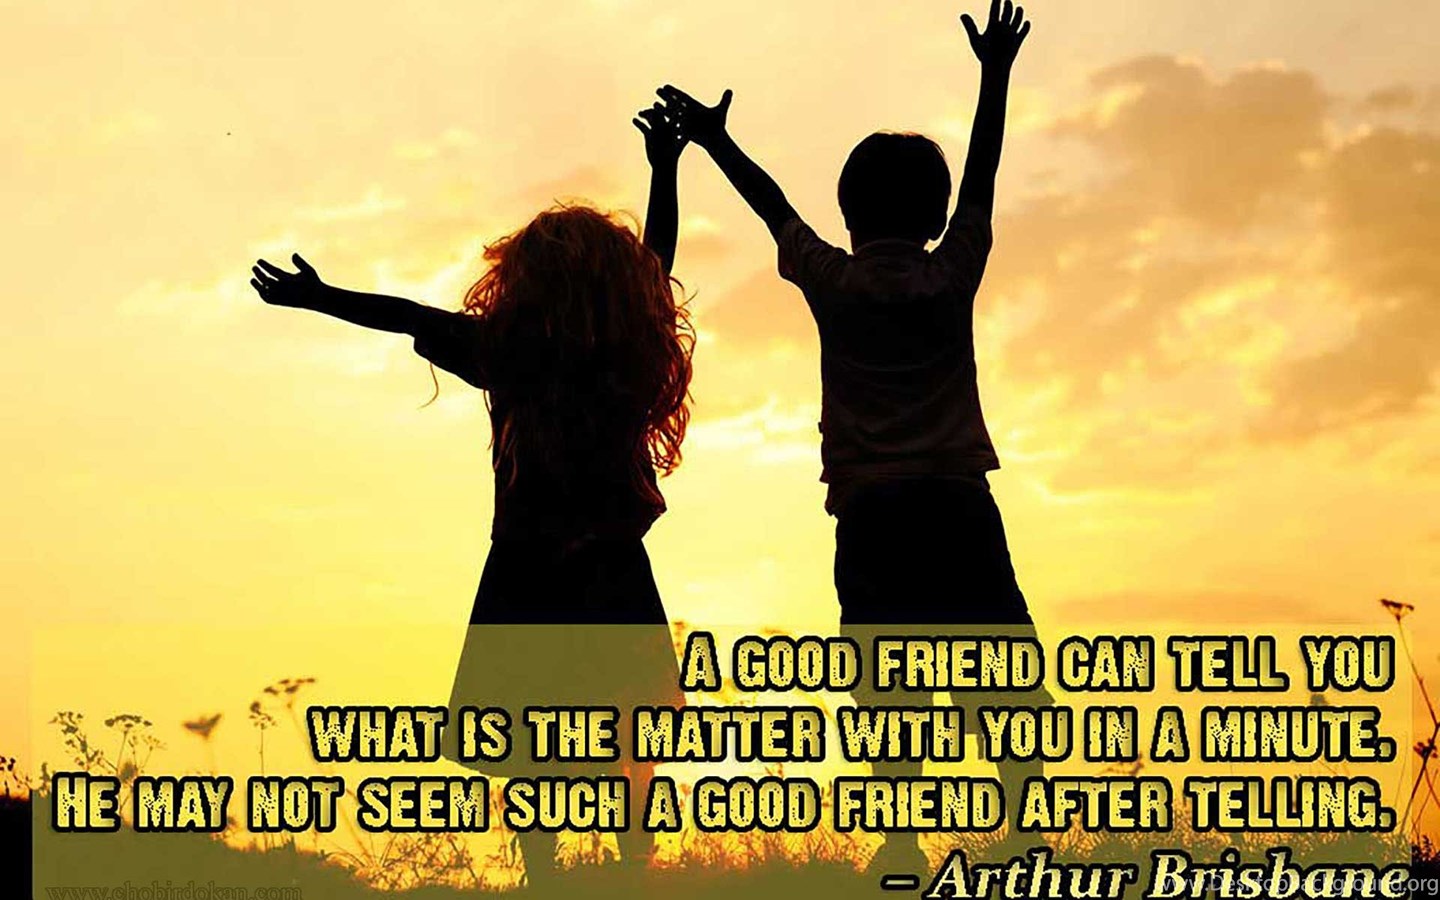 Can you best friend. Friendship quotes. Best friends. Bible quotes friends. Quotes about Friendship.